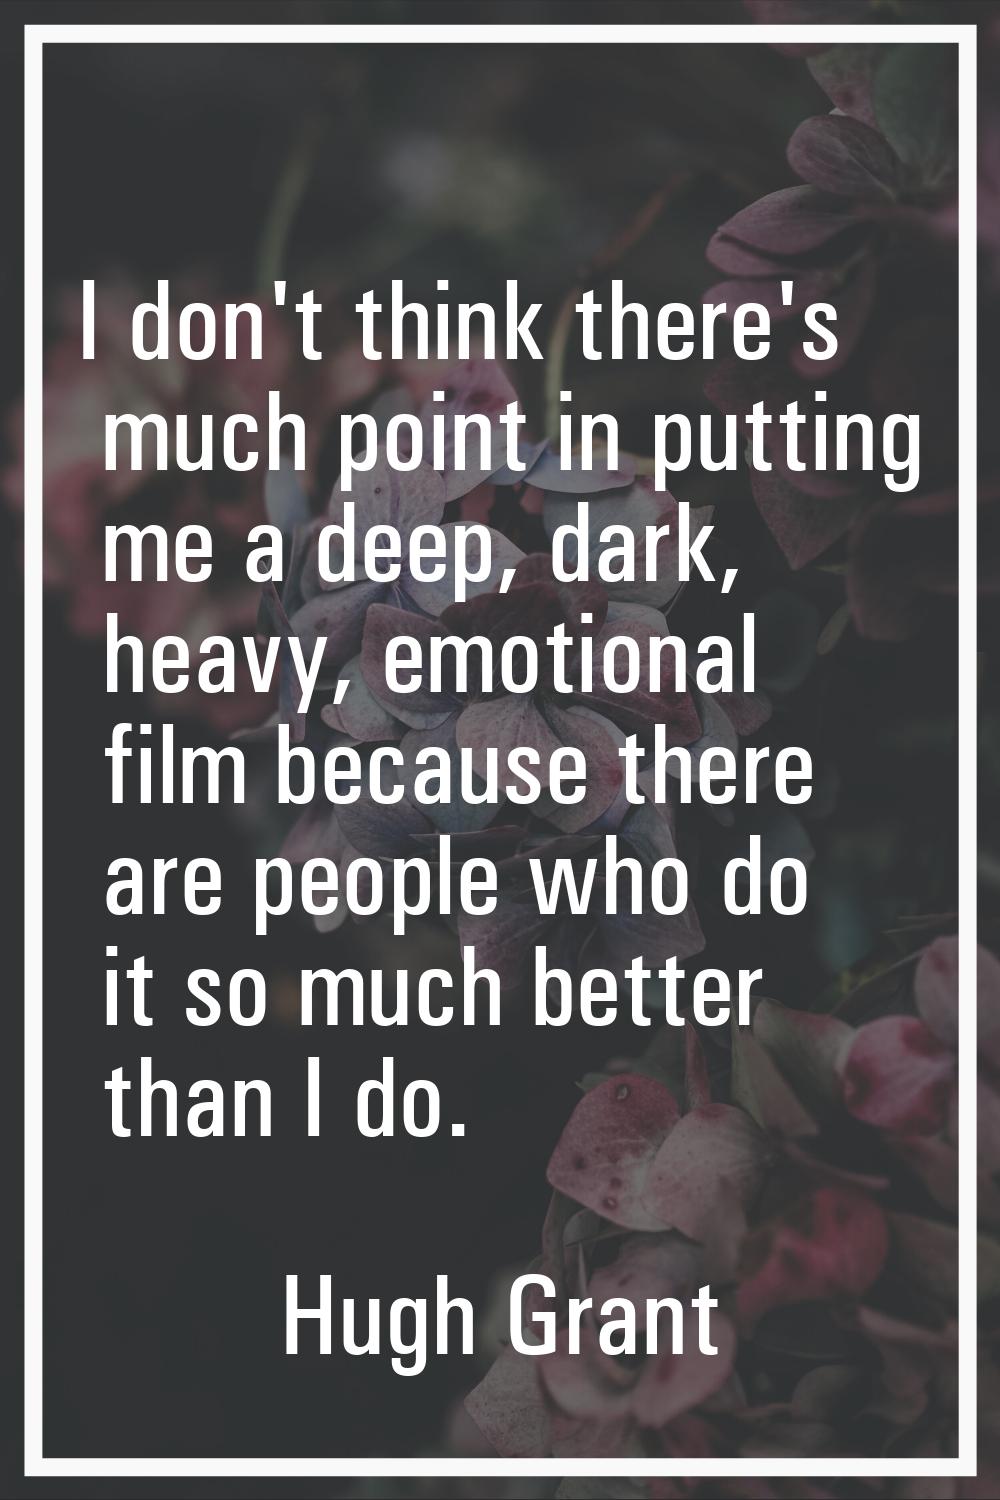 I don't think there's much point in putting me a deep, dark, heavy, emotional film because there ar